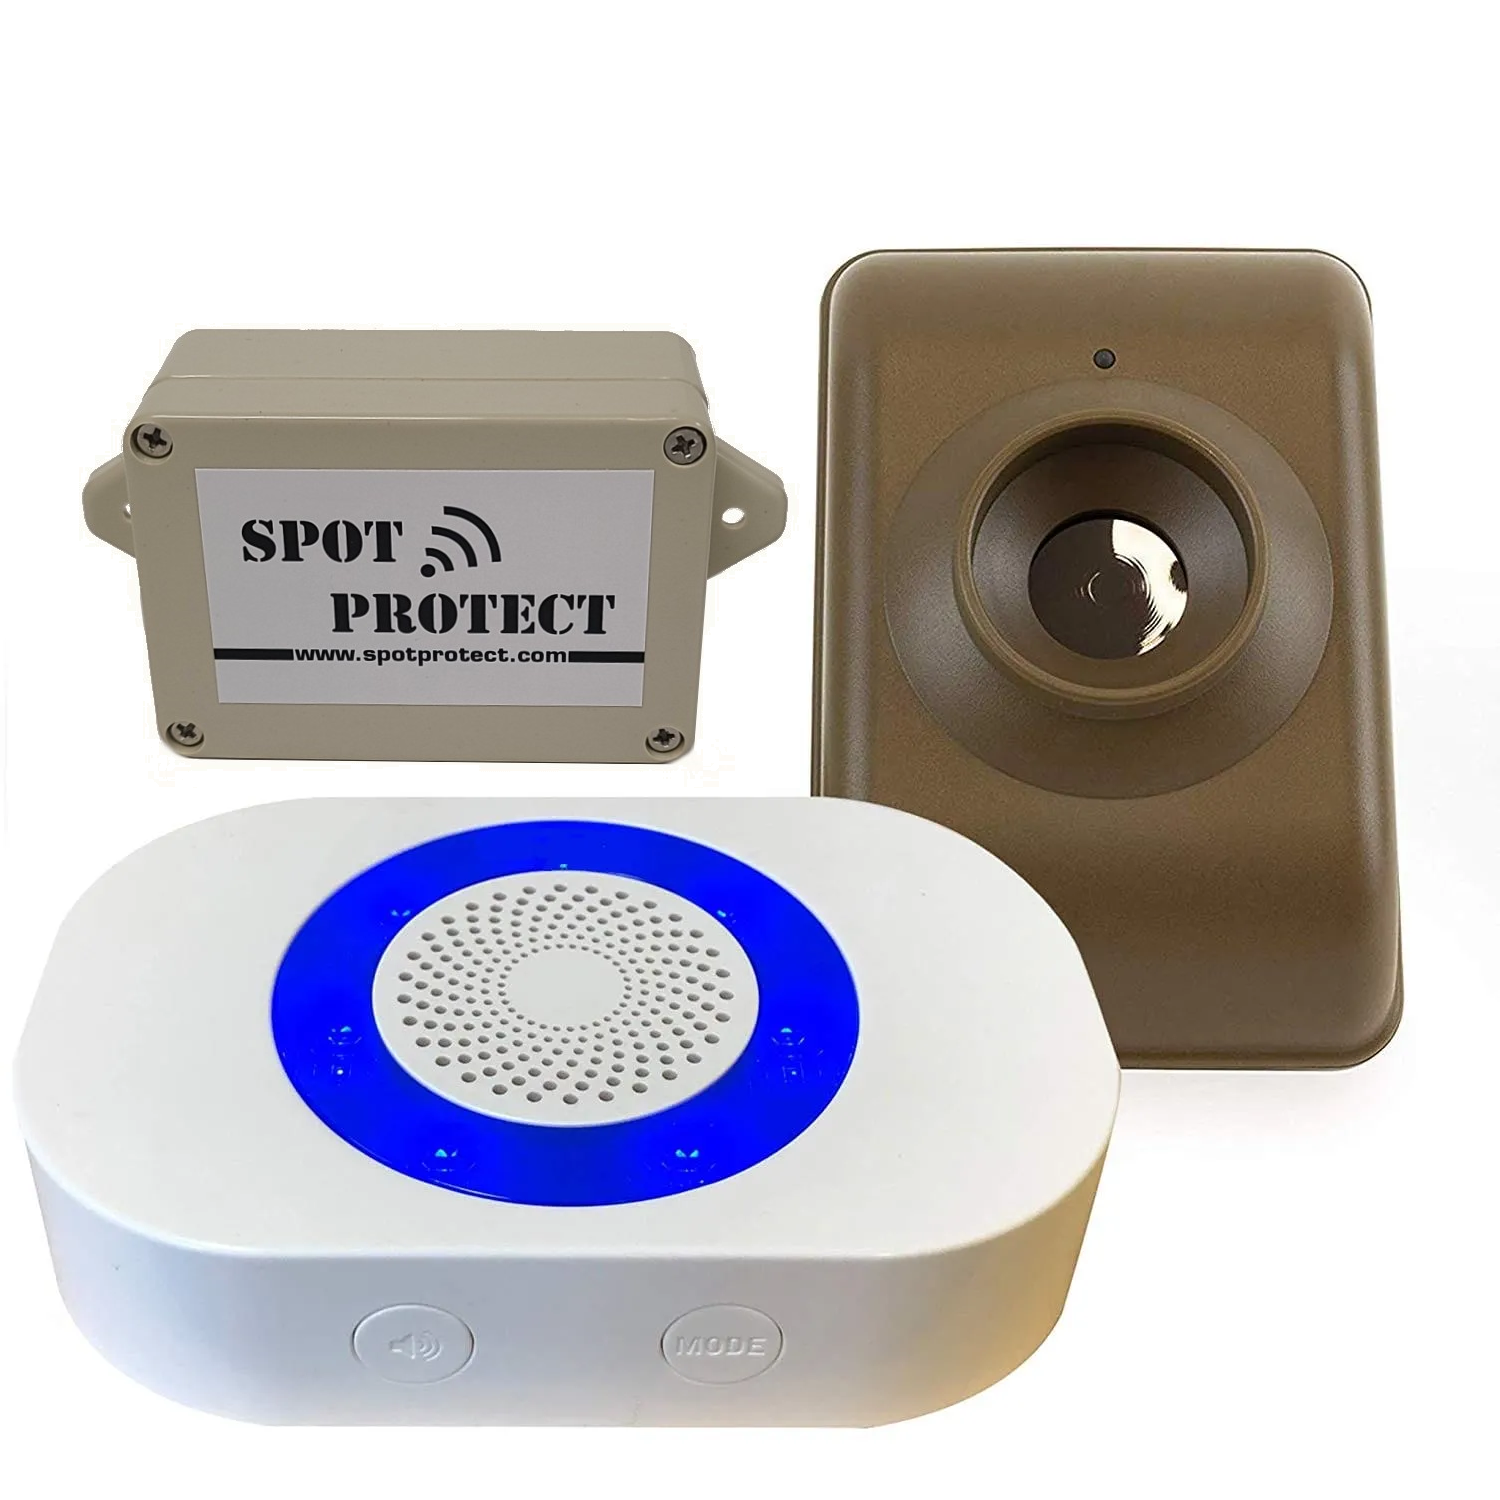 CarSpot DK4M Motion Sensing Driveway Alarm with Email and Text Alert